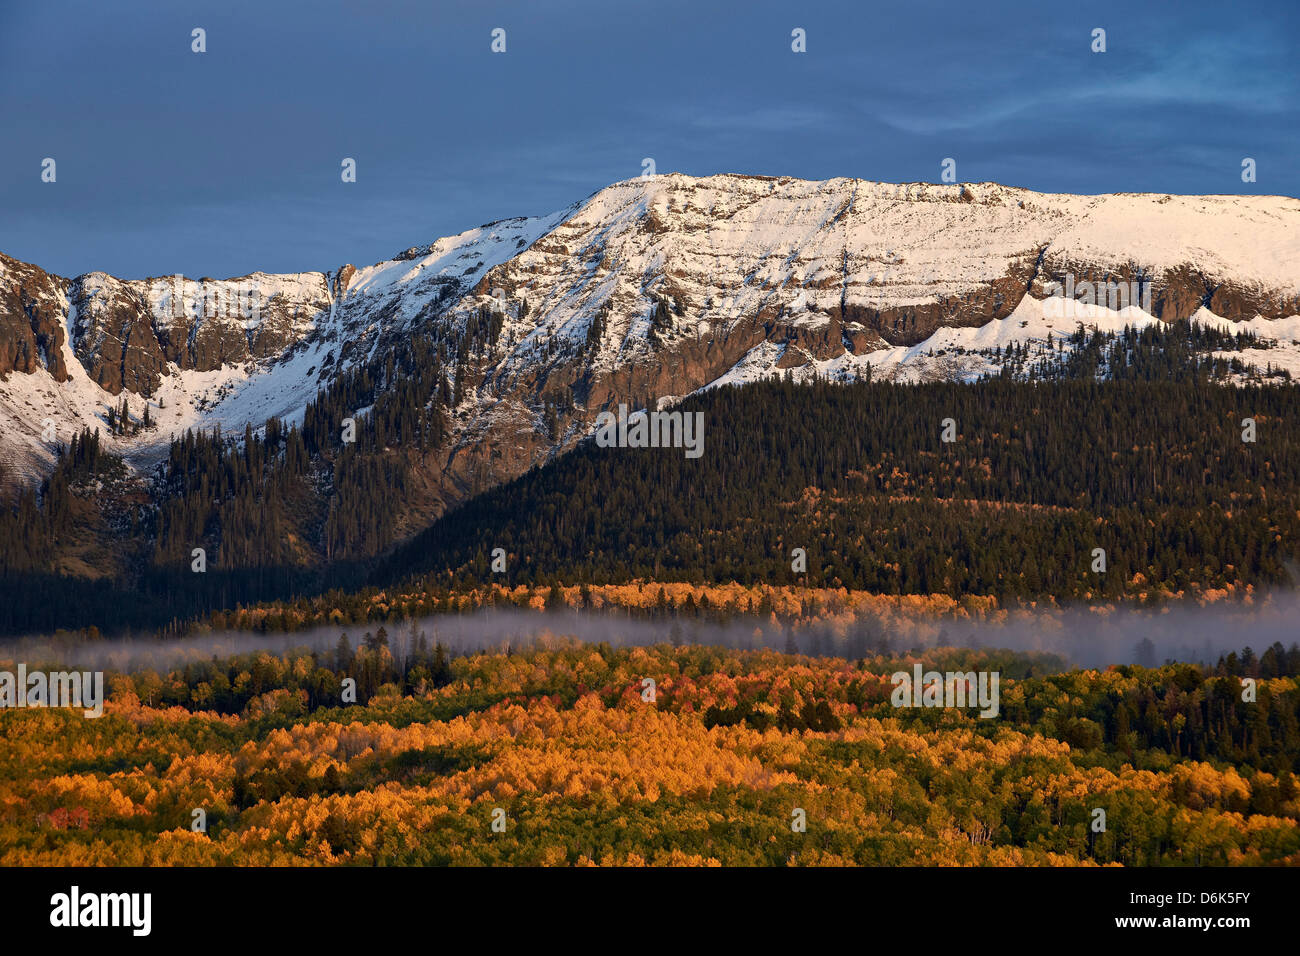 Snow-covered mountain in the Sneffels Range in the fall, Uncompahgre National Forest, Colorado, USA Stock Photo